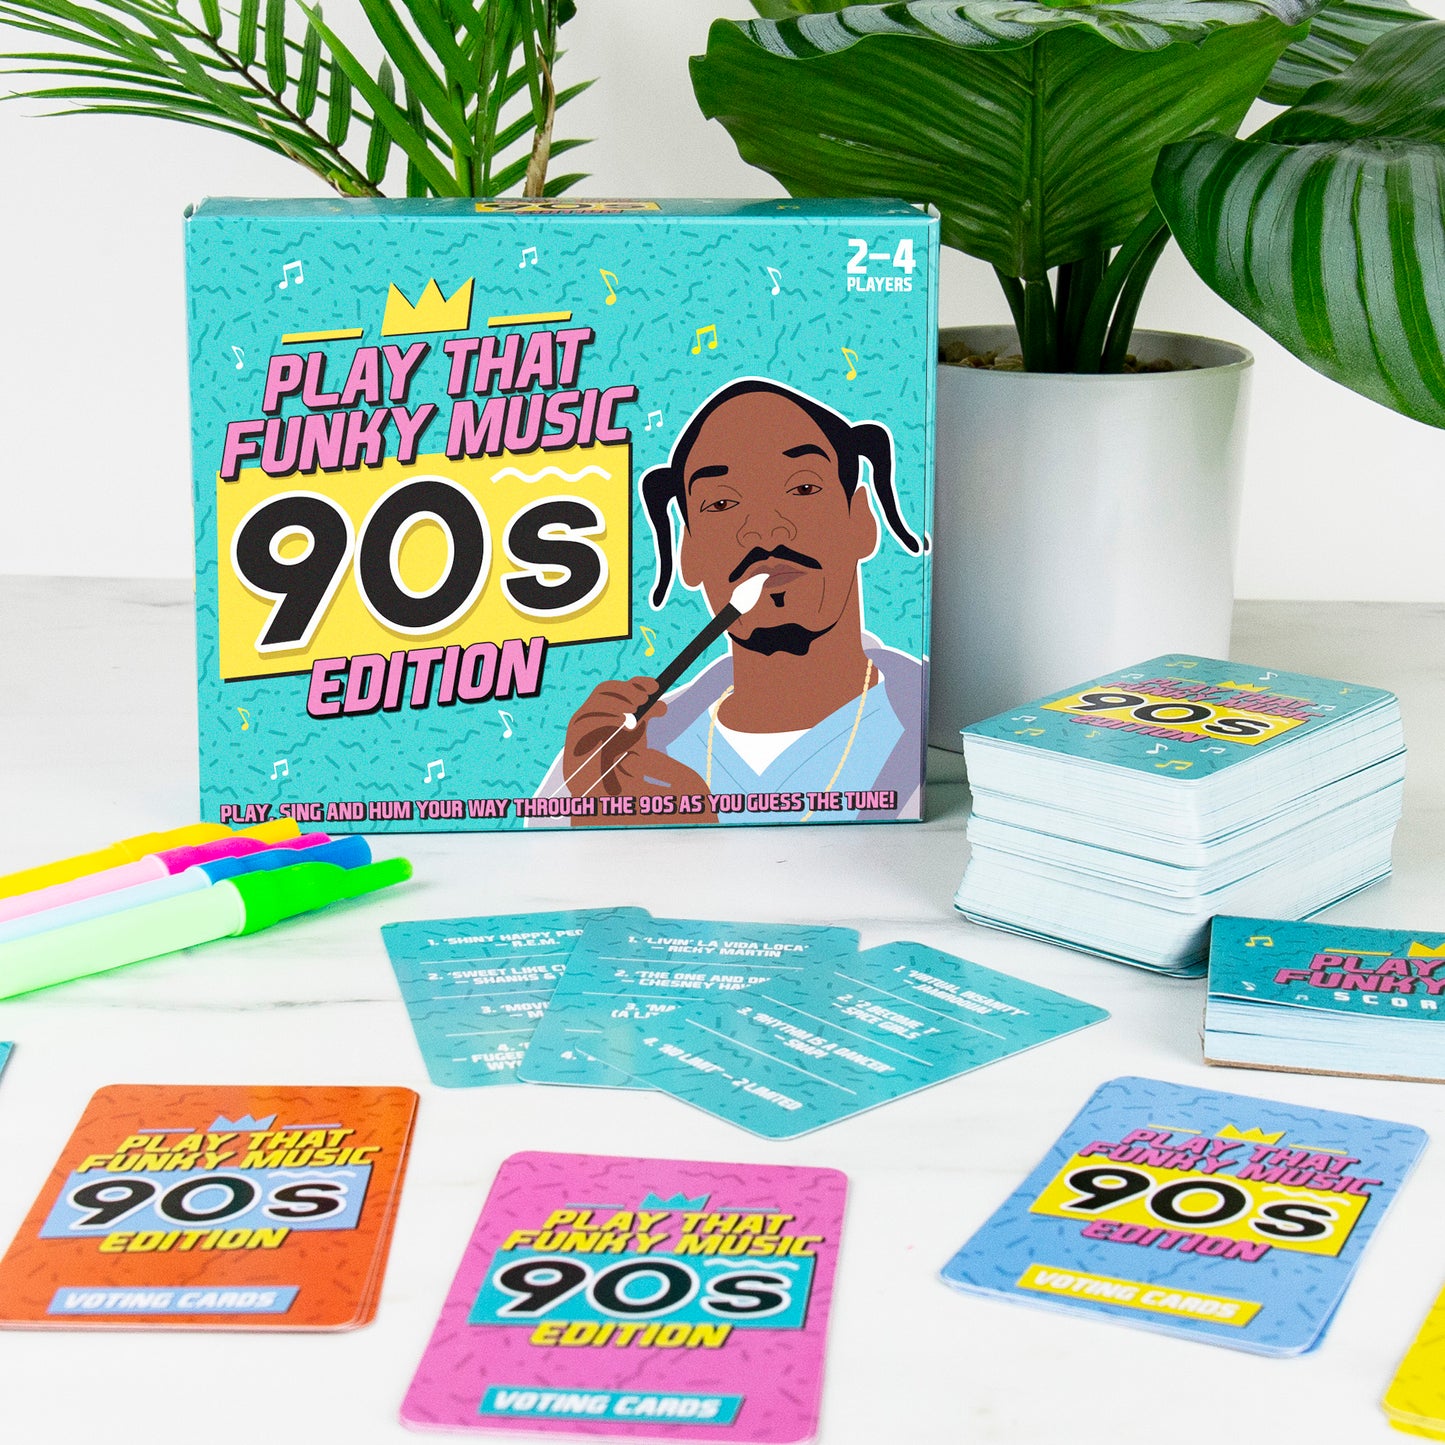 Game Play That Funky Music 90s Edition - Gift Republic